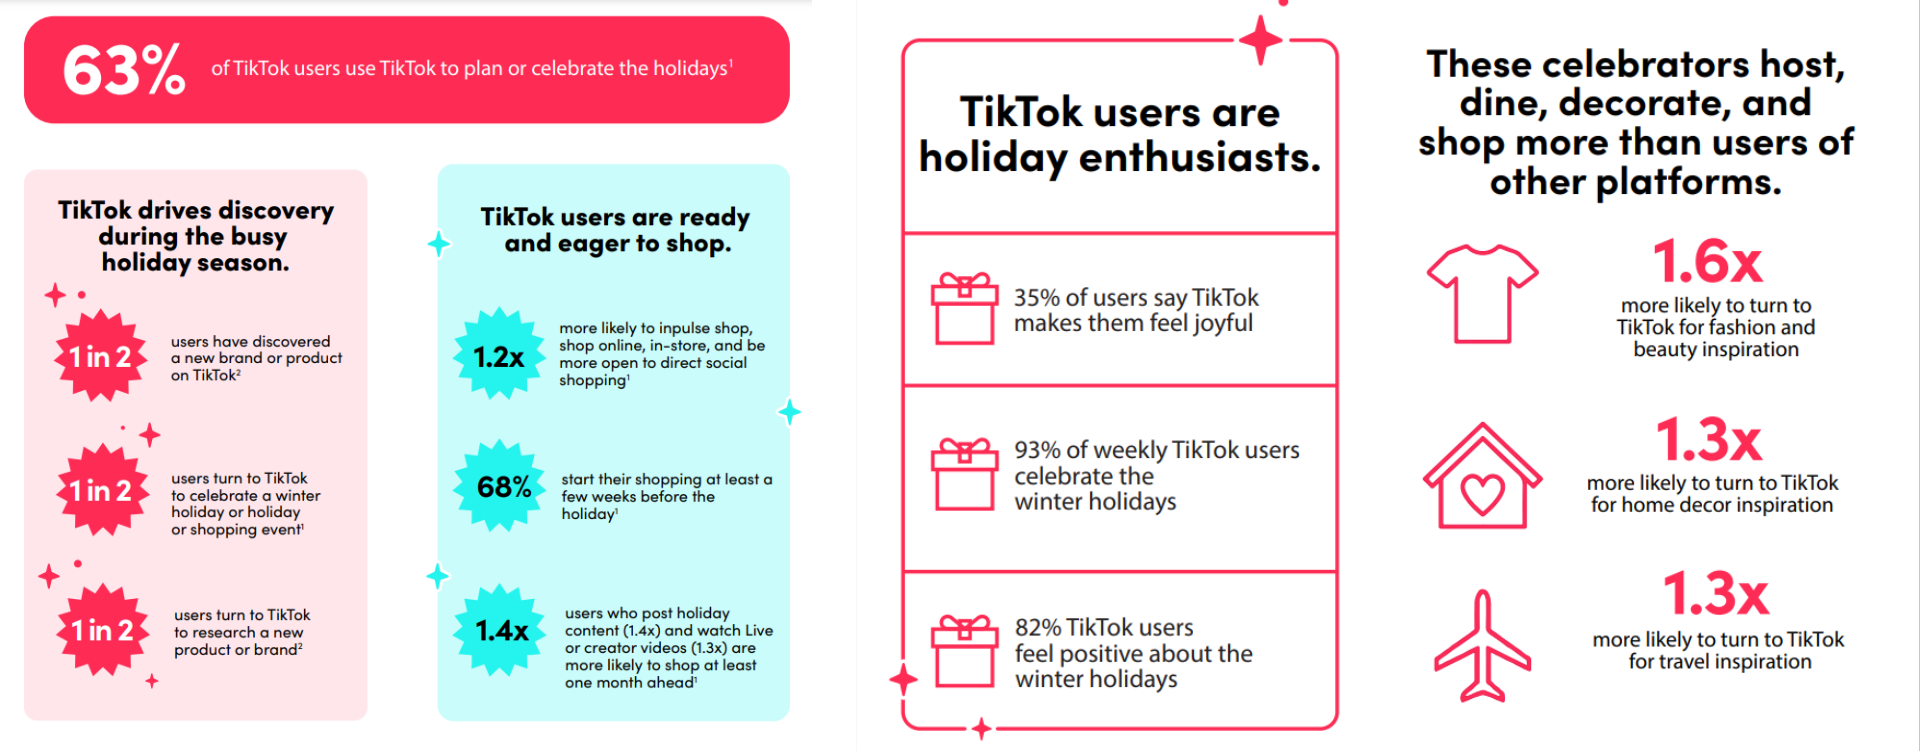 Some insights about TikTok holiday